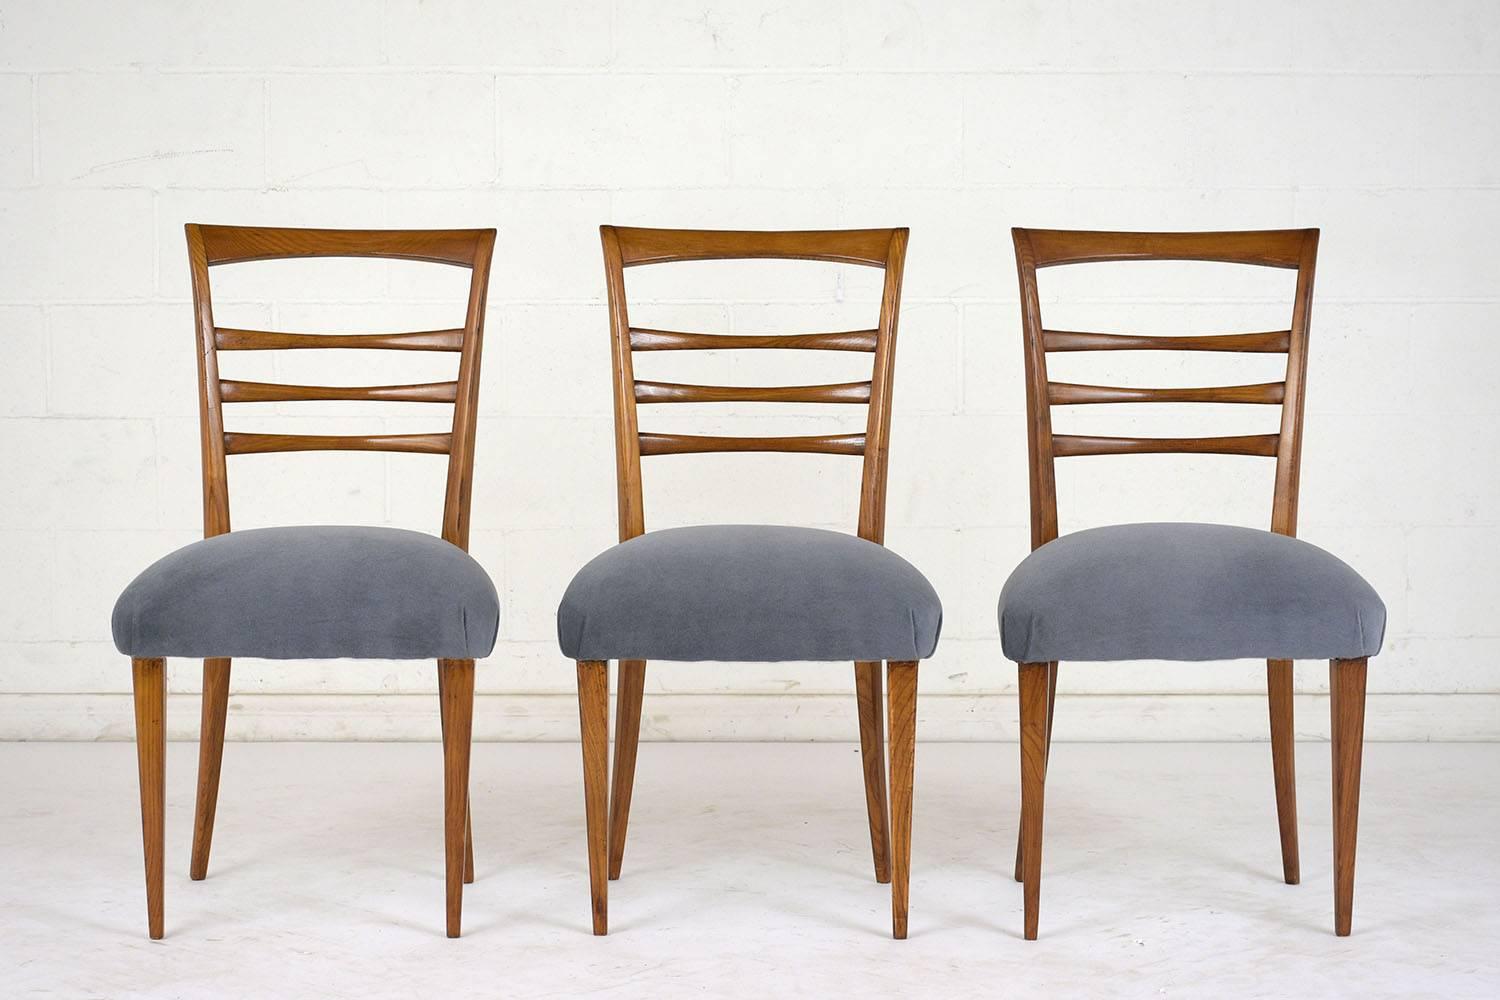 This Set of Six 1960s Mid-Century Modern Dining Chairs are fully restored, made out of solid wood, and has been stained in a rich walnut color with a newly lacquered finish. The set features a high back ladder design, seat cushions newly upholstered